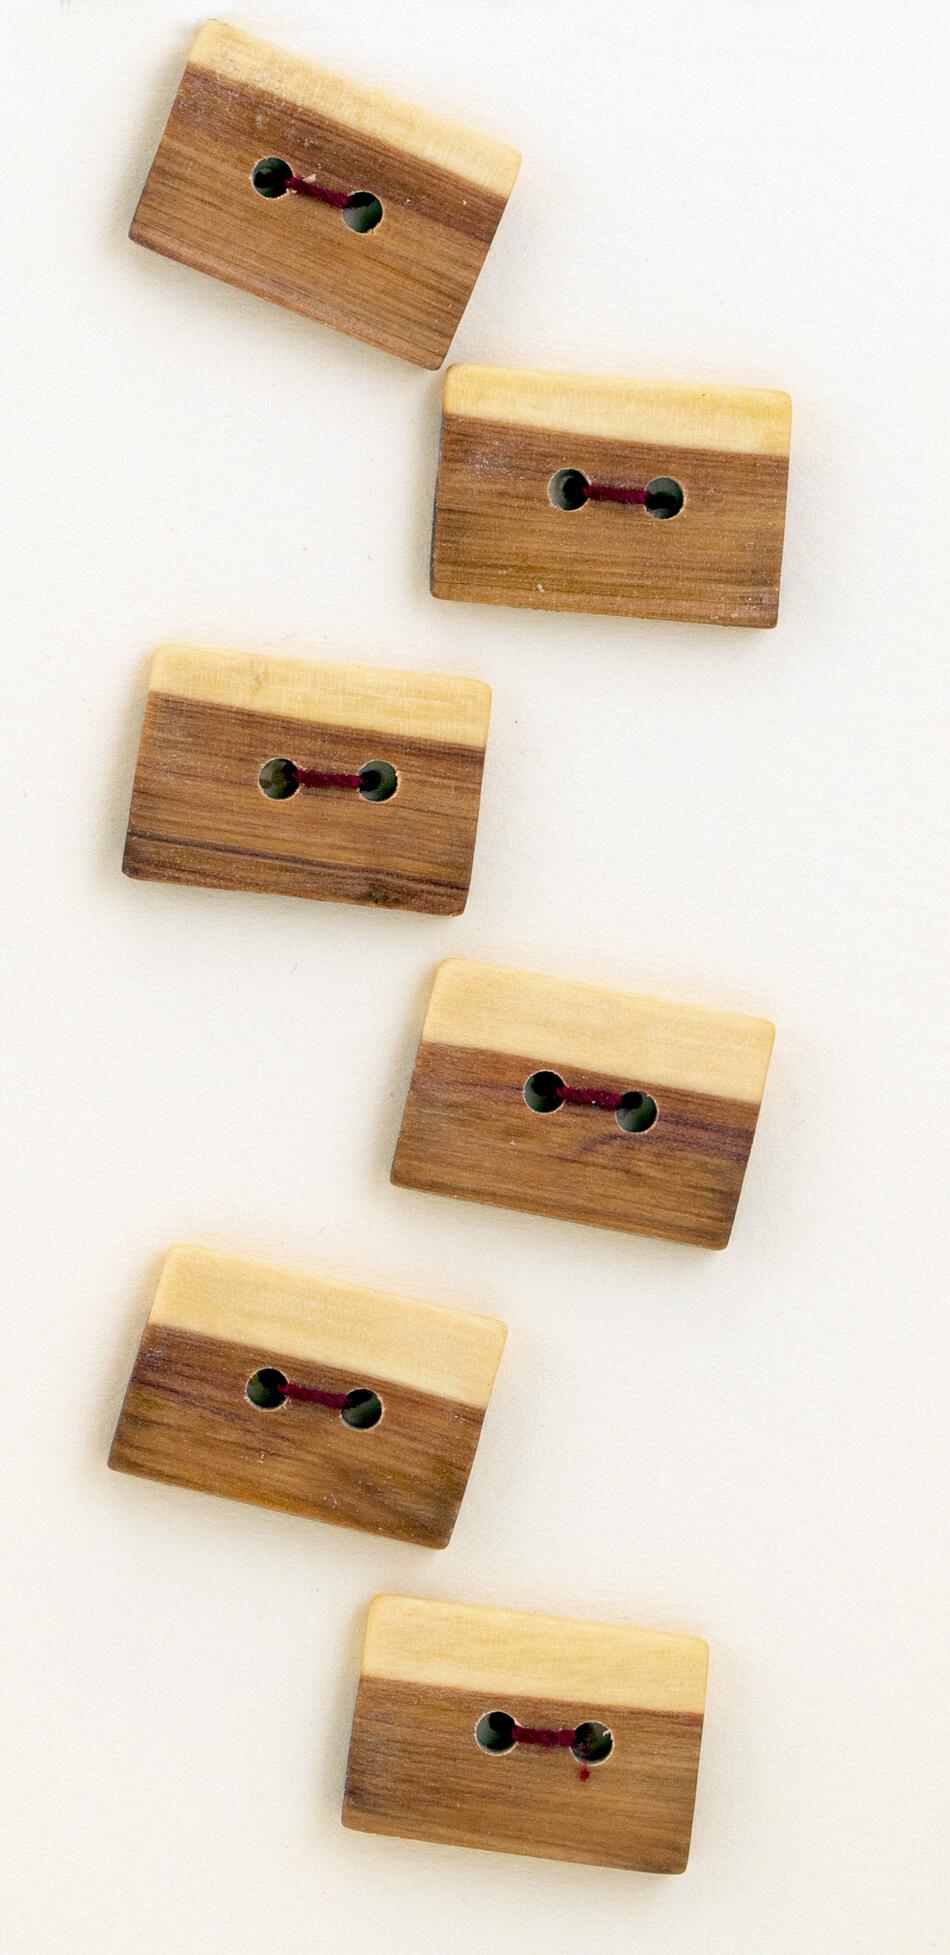 MultiCraft Equipment Six Small Square or Oblong Buttons  Mixed Wood